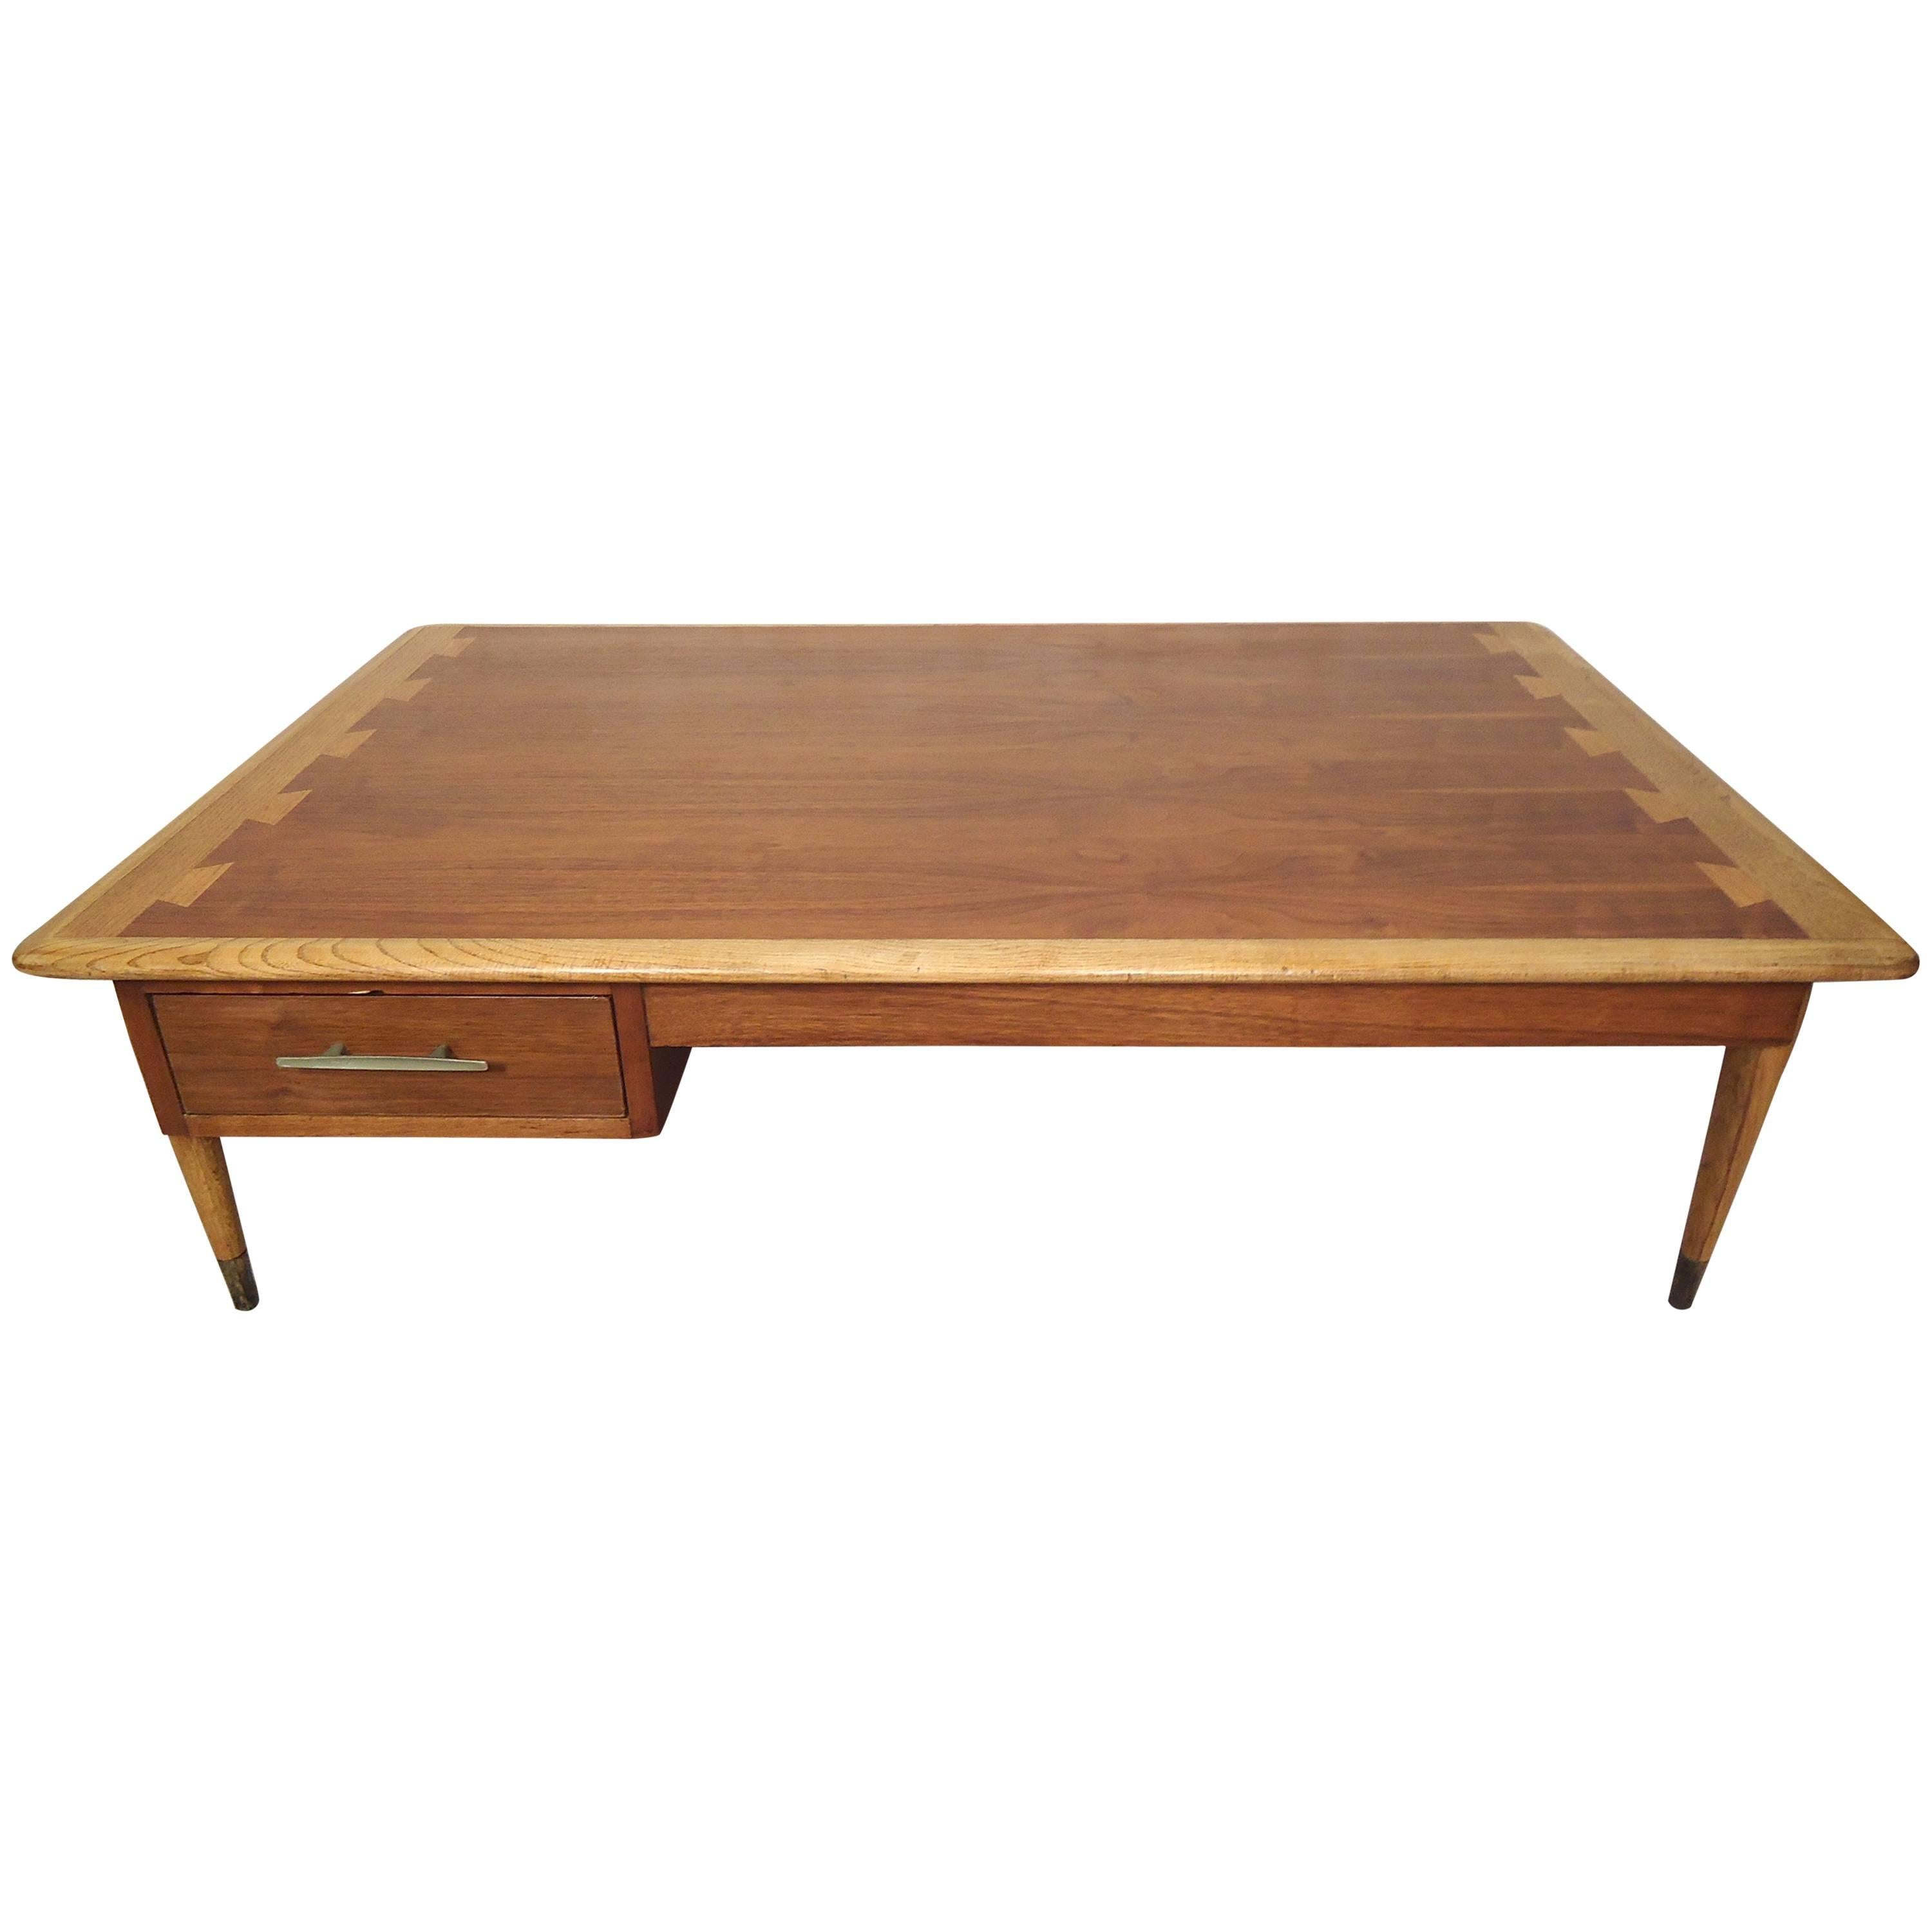 Large Coffee Table with Dovetail Inlay by Lane